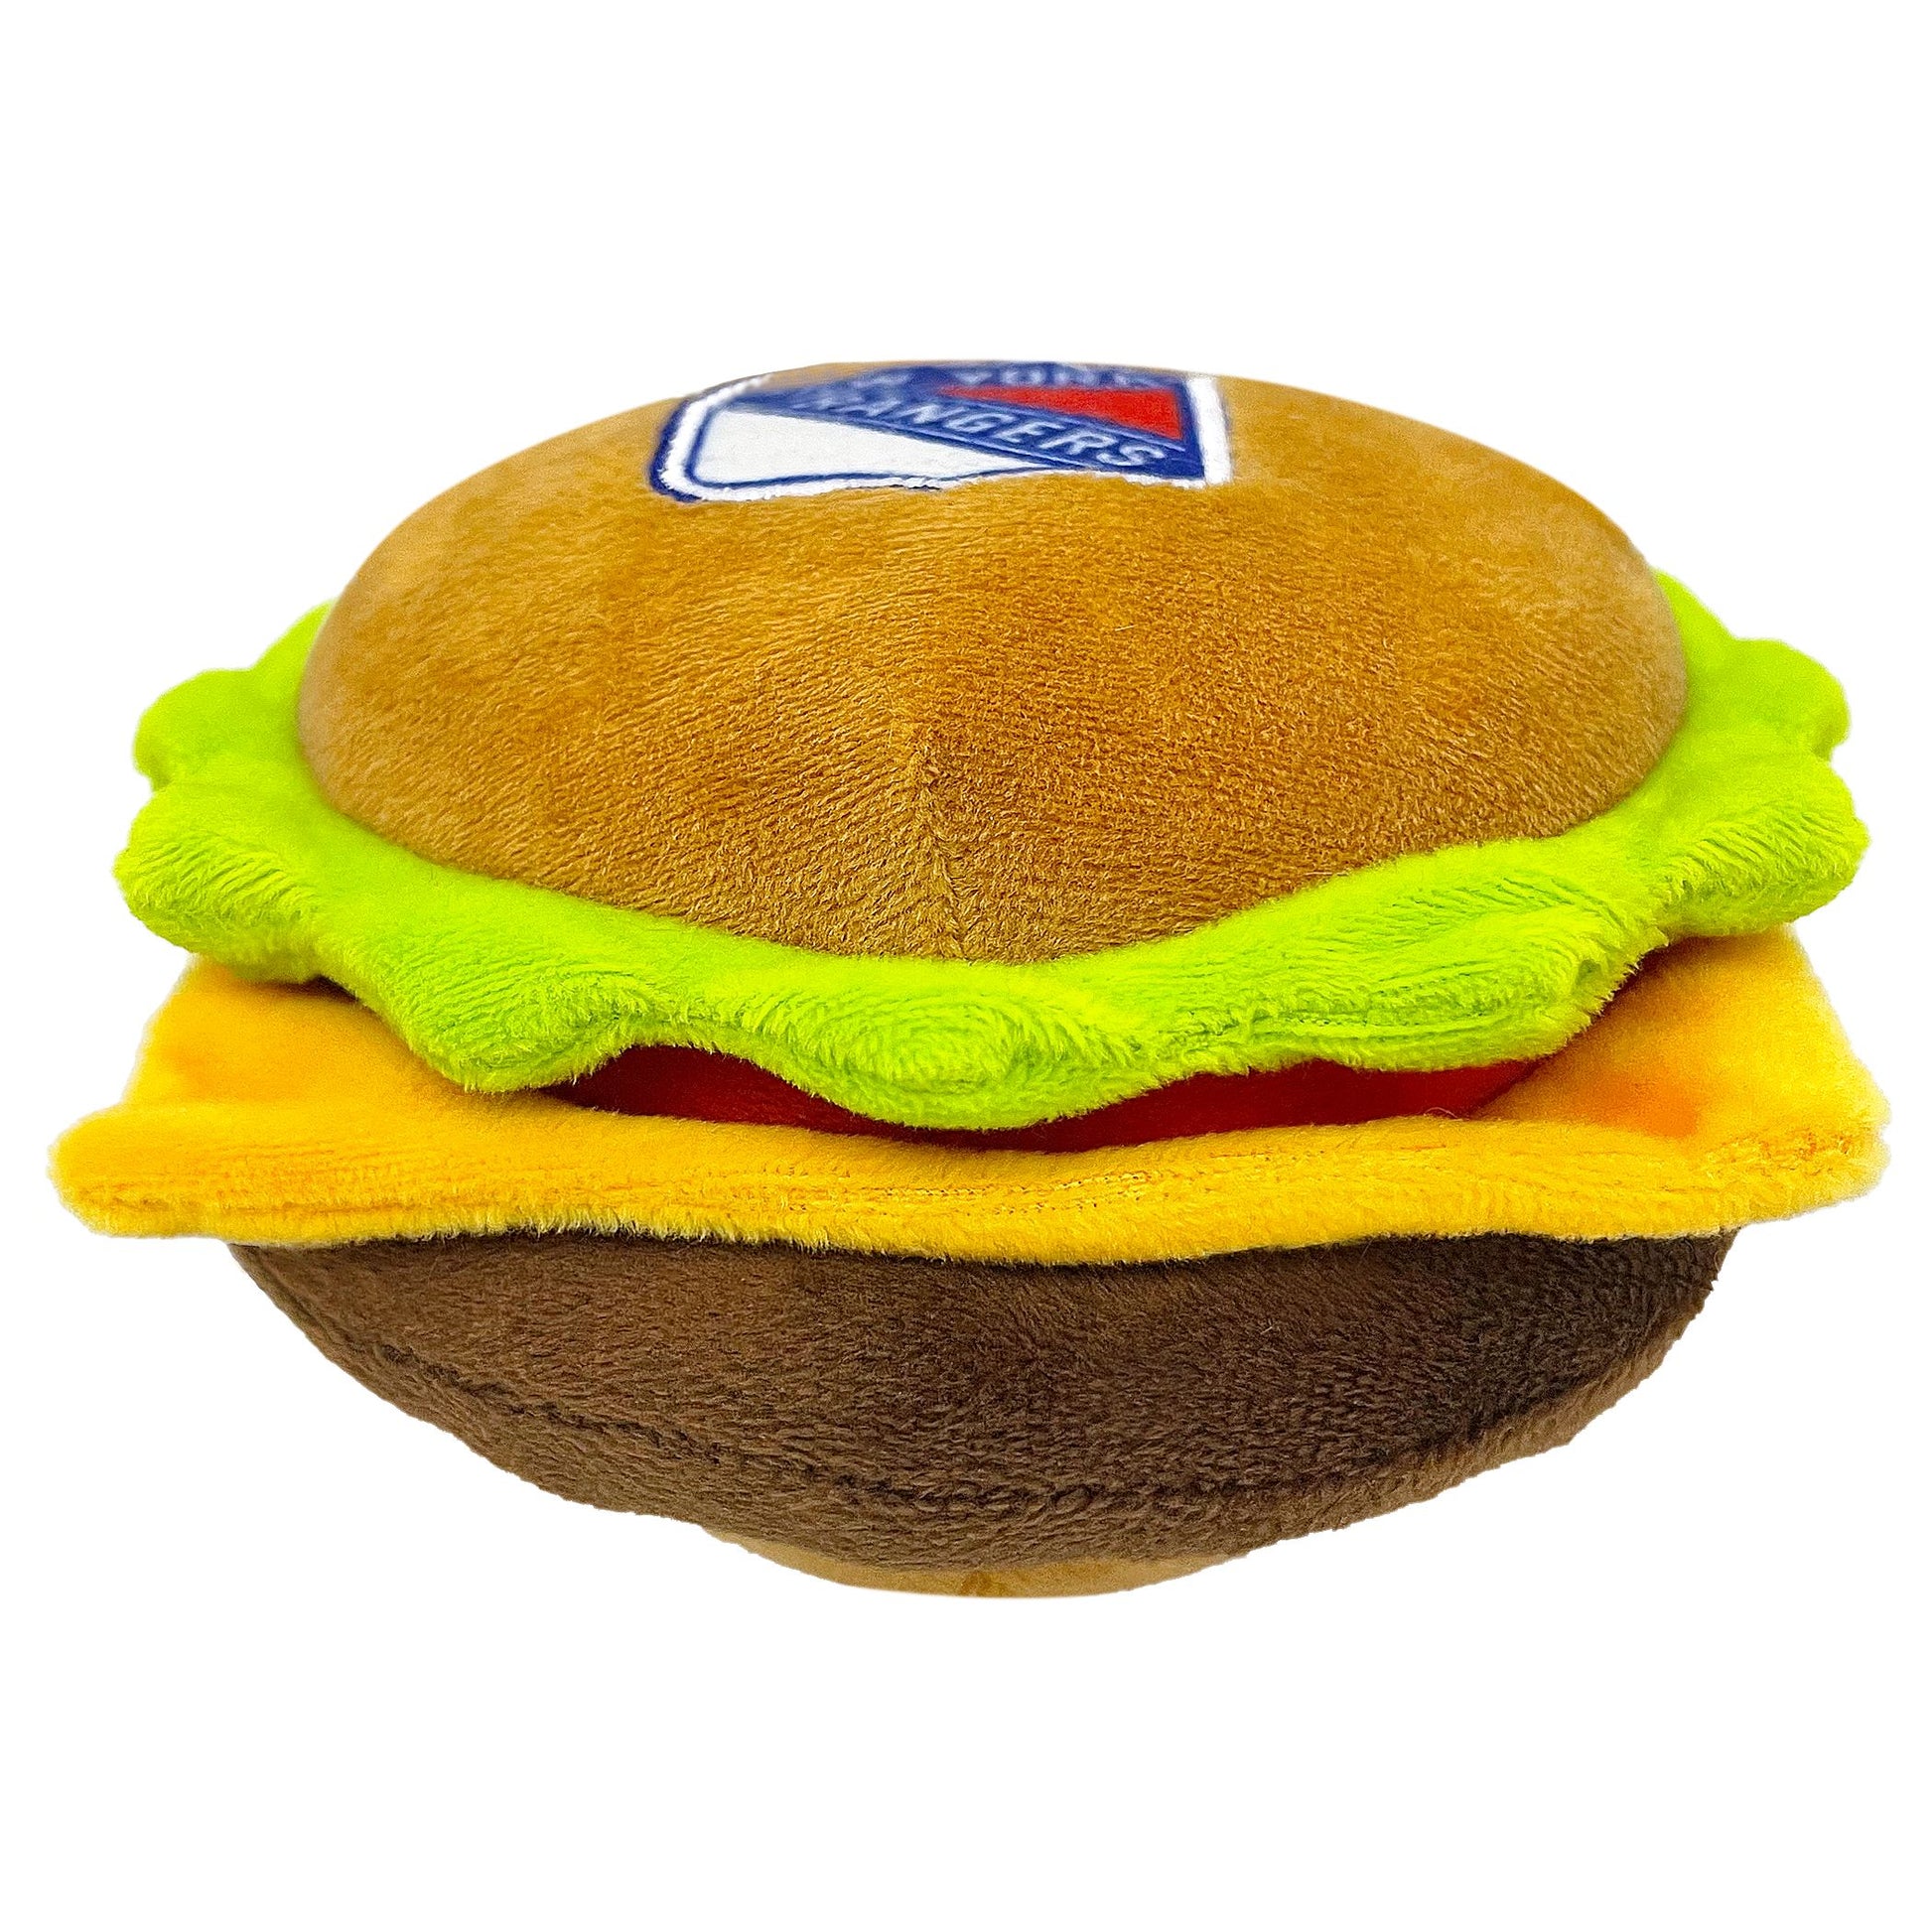 New York Rangers Game Day Burger Plush Toy - Trendy Dog Boutique